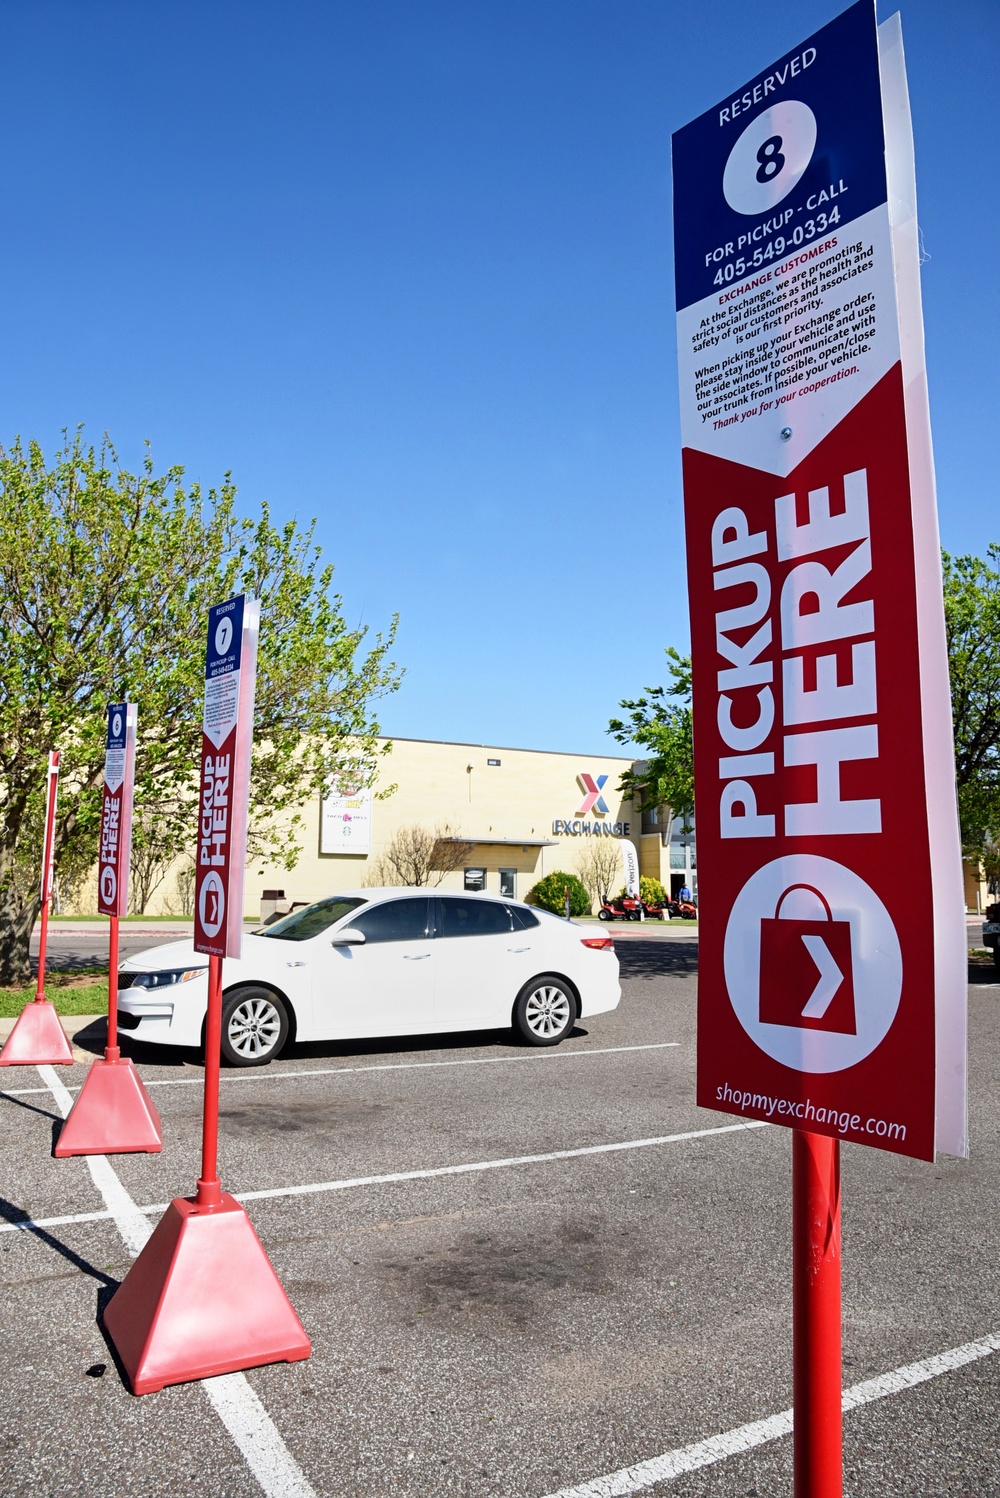 Tinker Exchange offers Curbside service